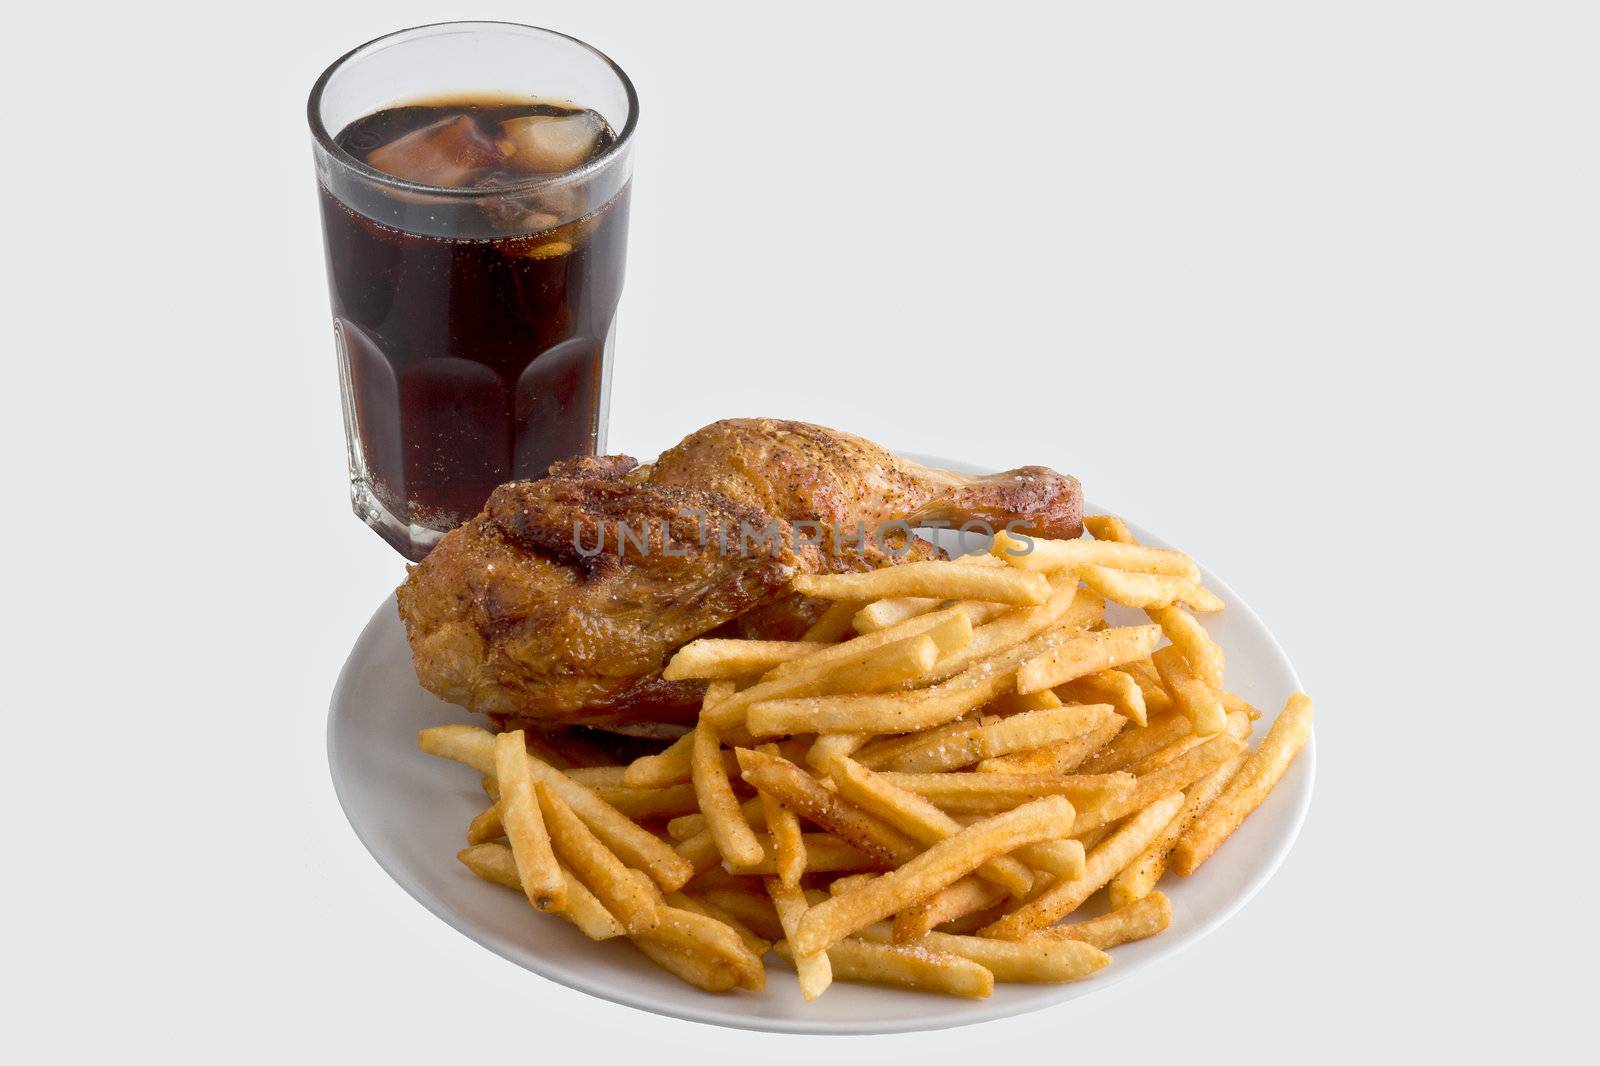 Plate fried chicken with french fries next to a cold cola. Isolated